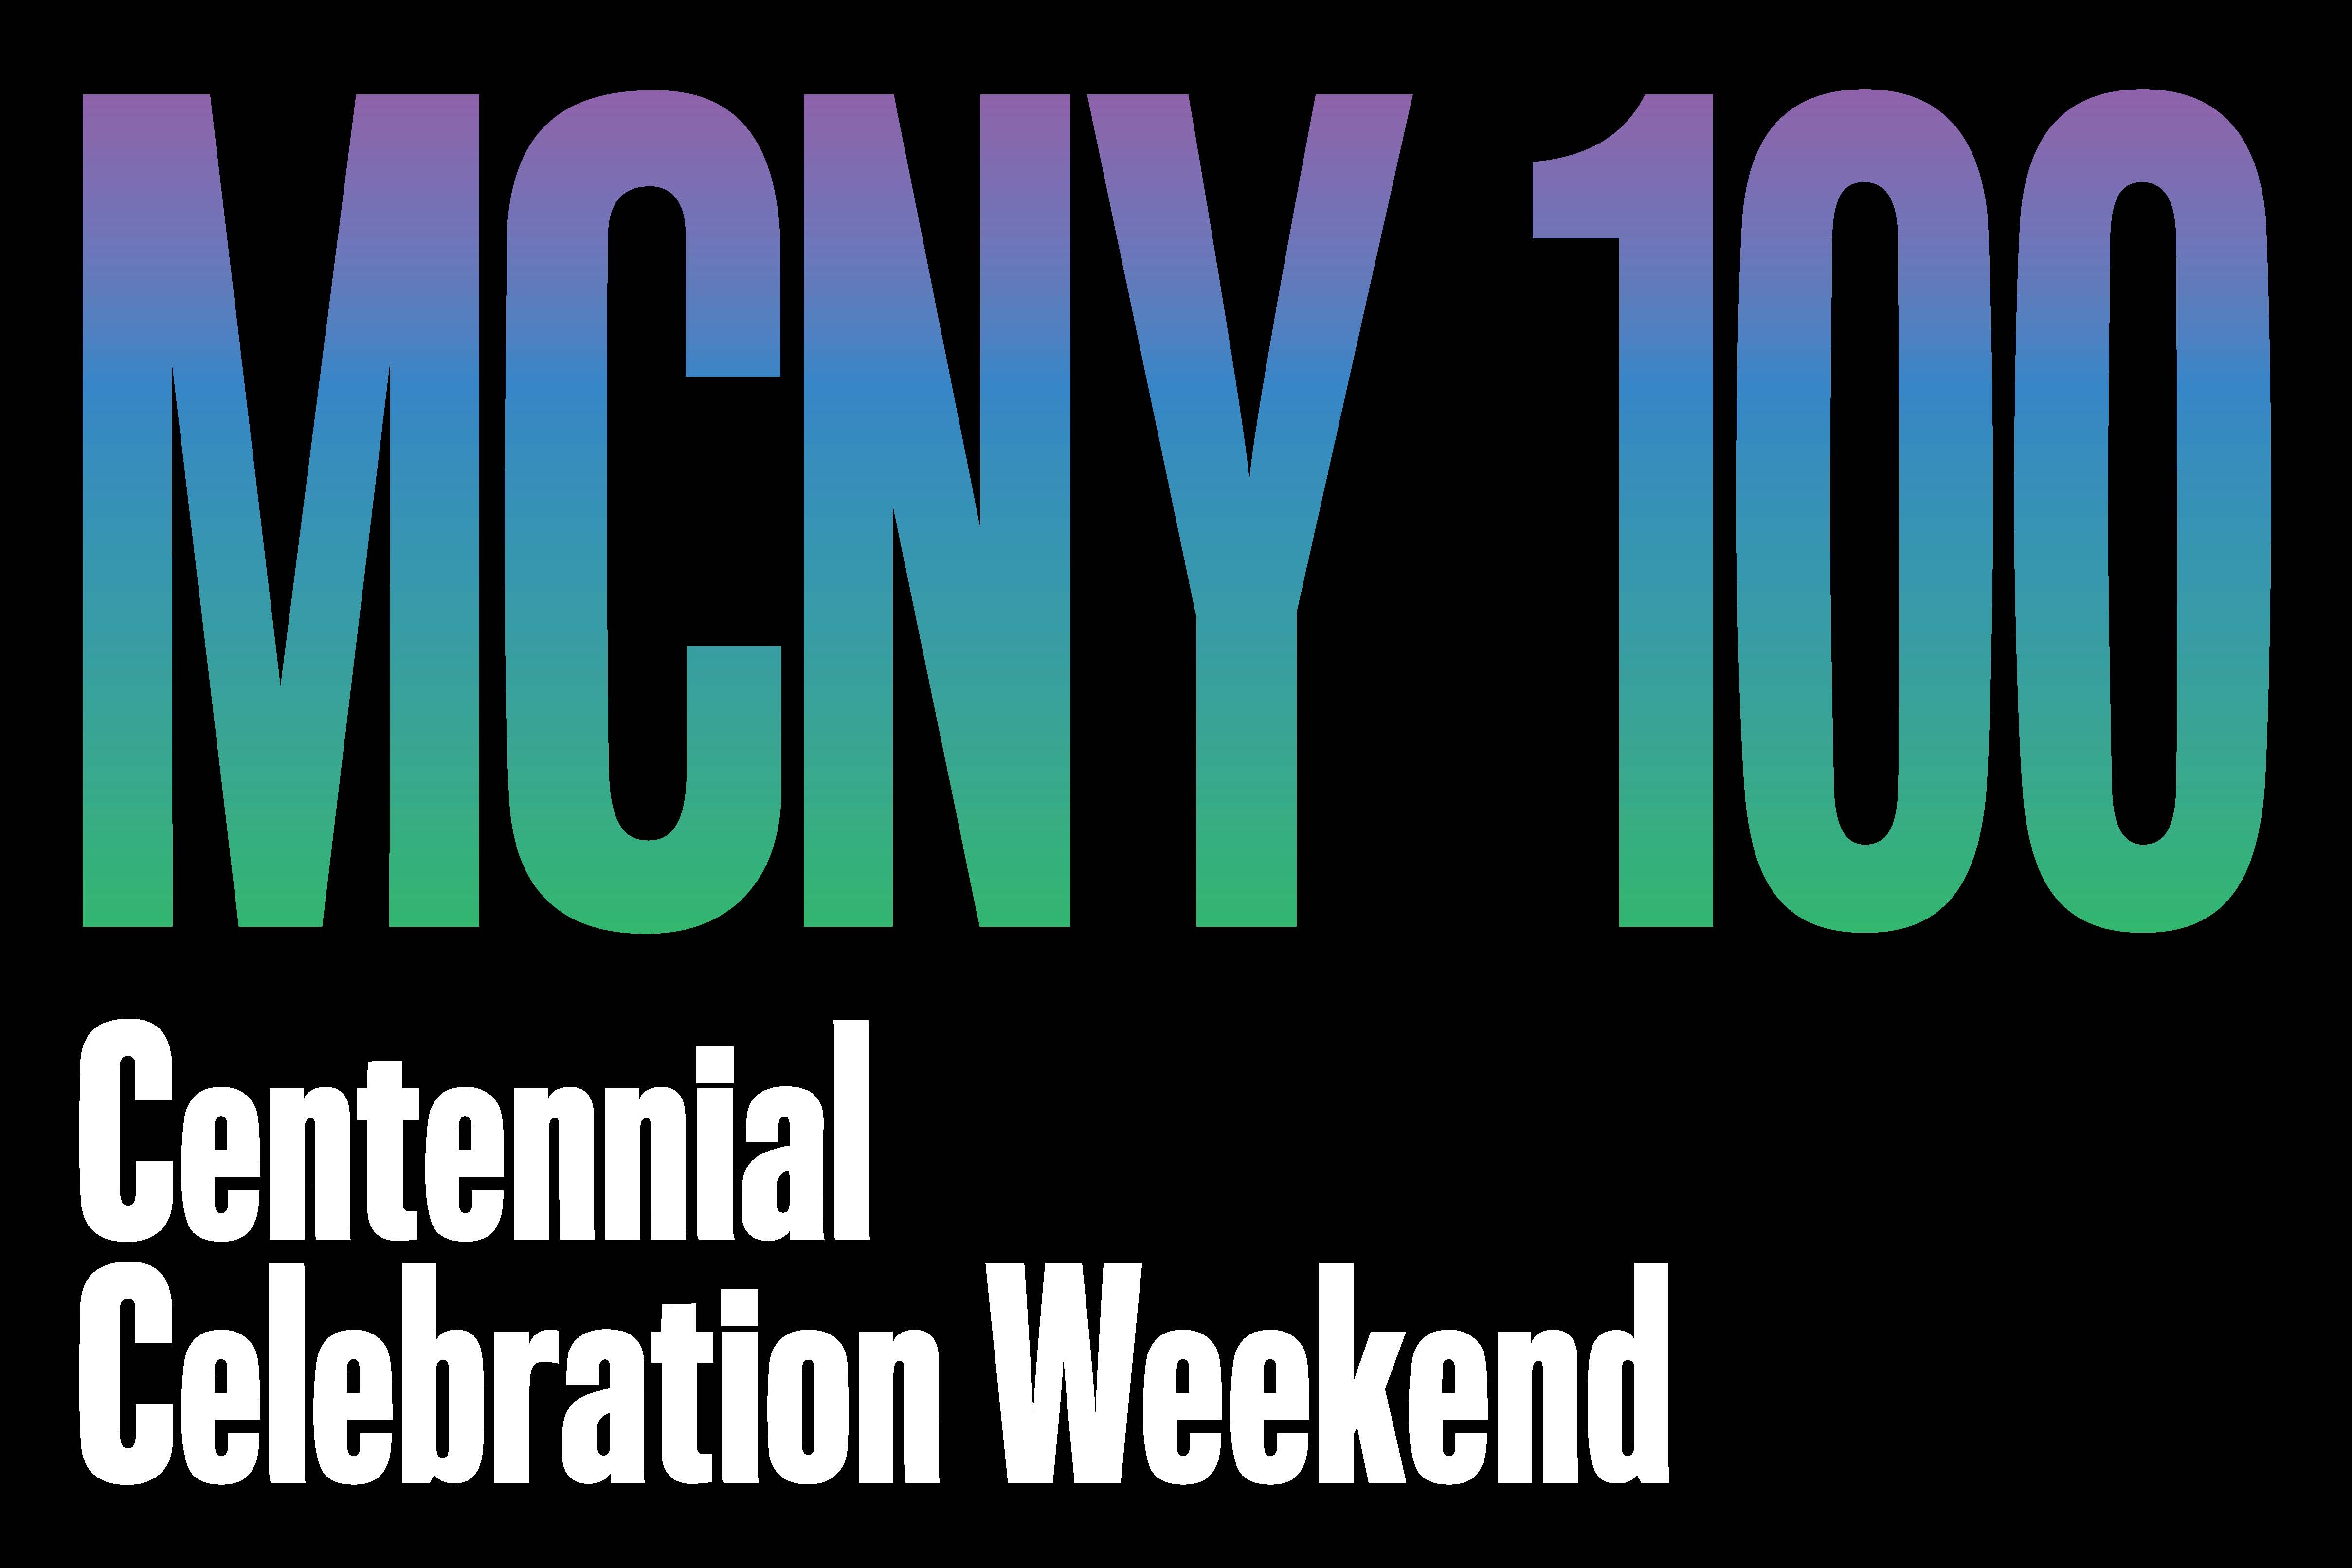 MCNY 100 are written in a blue/green gradient on a black background with the subtitle Centennial Celebration Weekend in white. 